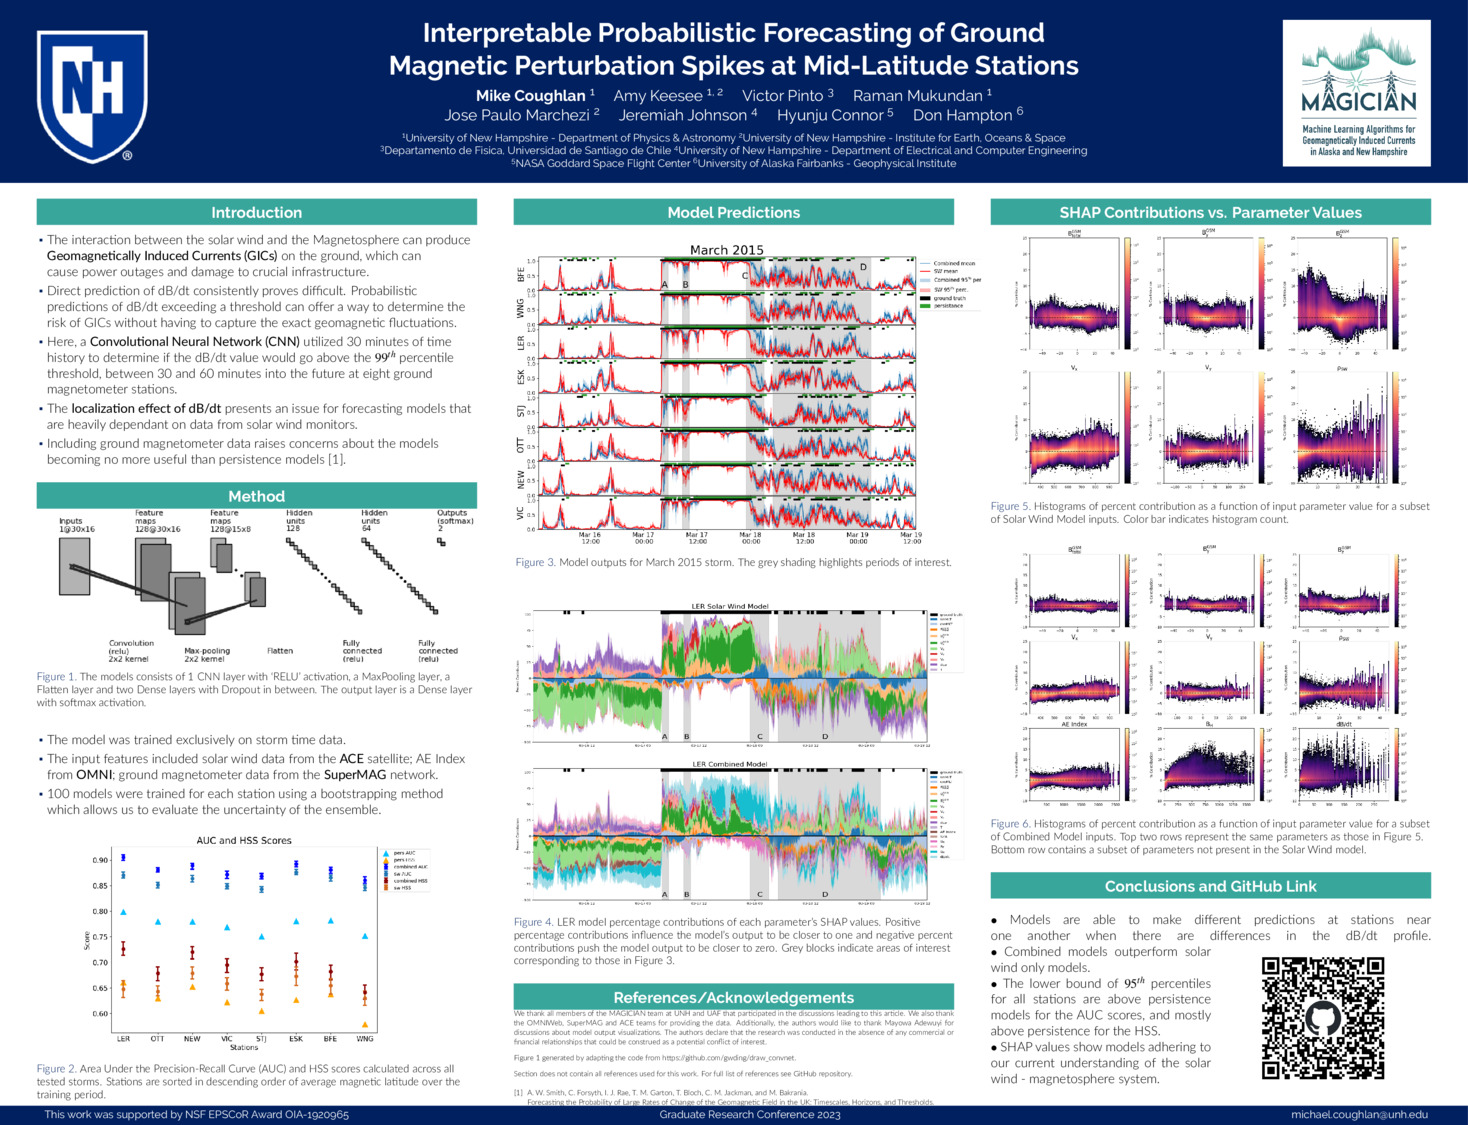 Interpretable Probabilistic Forecasting Of Ground Magnetic Perturbation Spikes At Mid-Latitude Stations by mikecoughlan